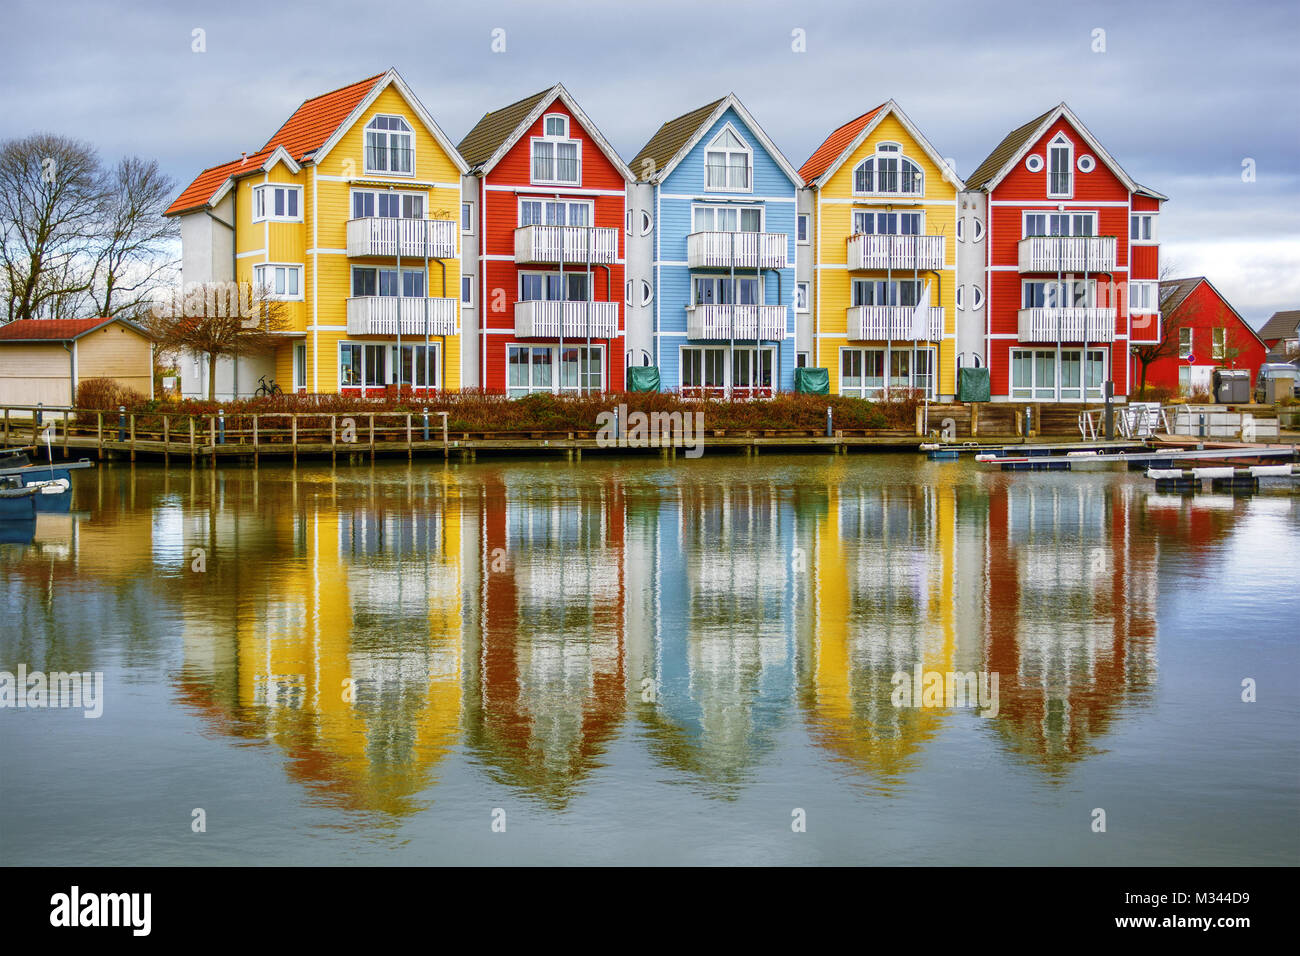 Multi-colored houses along the waterfront, Greifswald, Vorpommern-Greifswald, Mecklenburg-Vorpommern, Germany Stock Photo